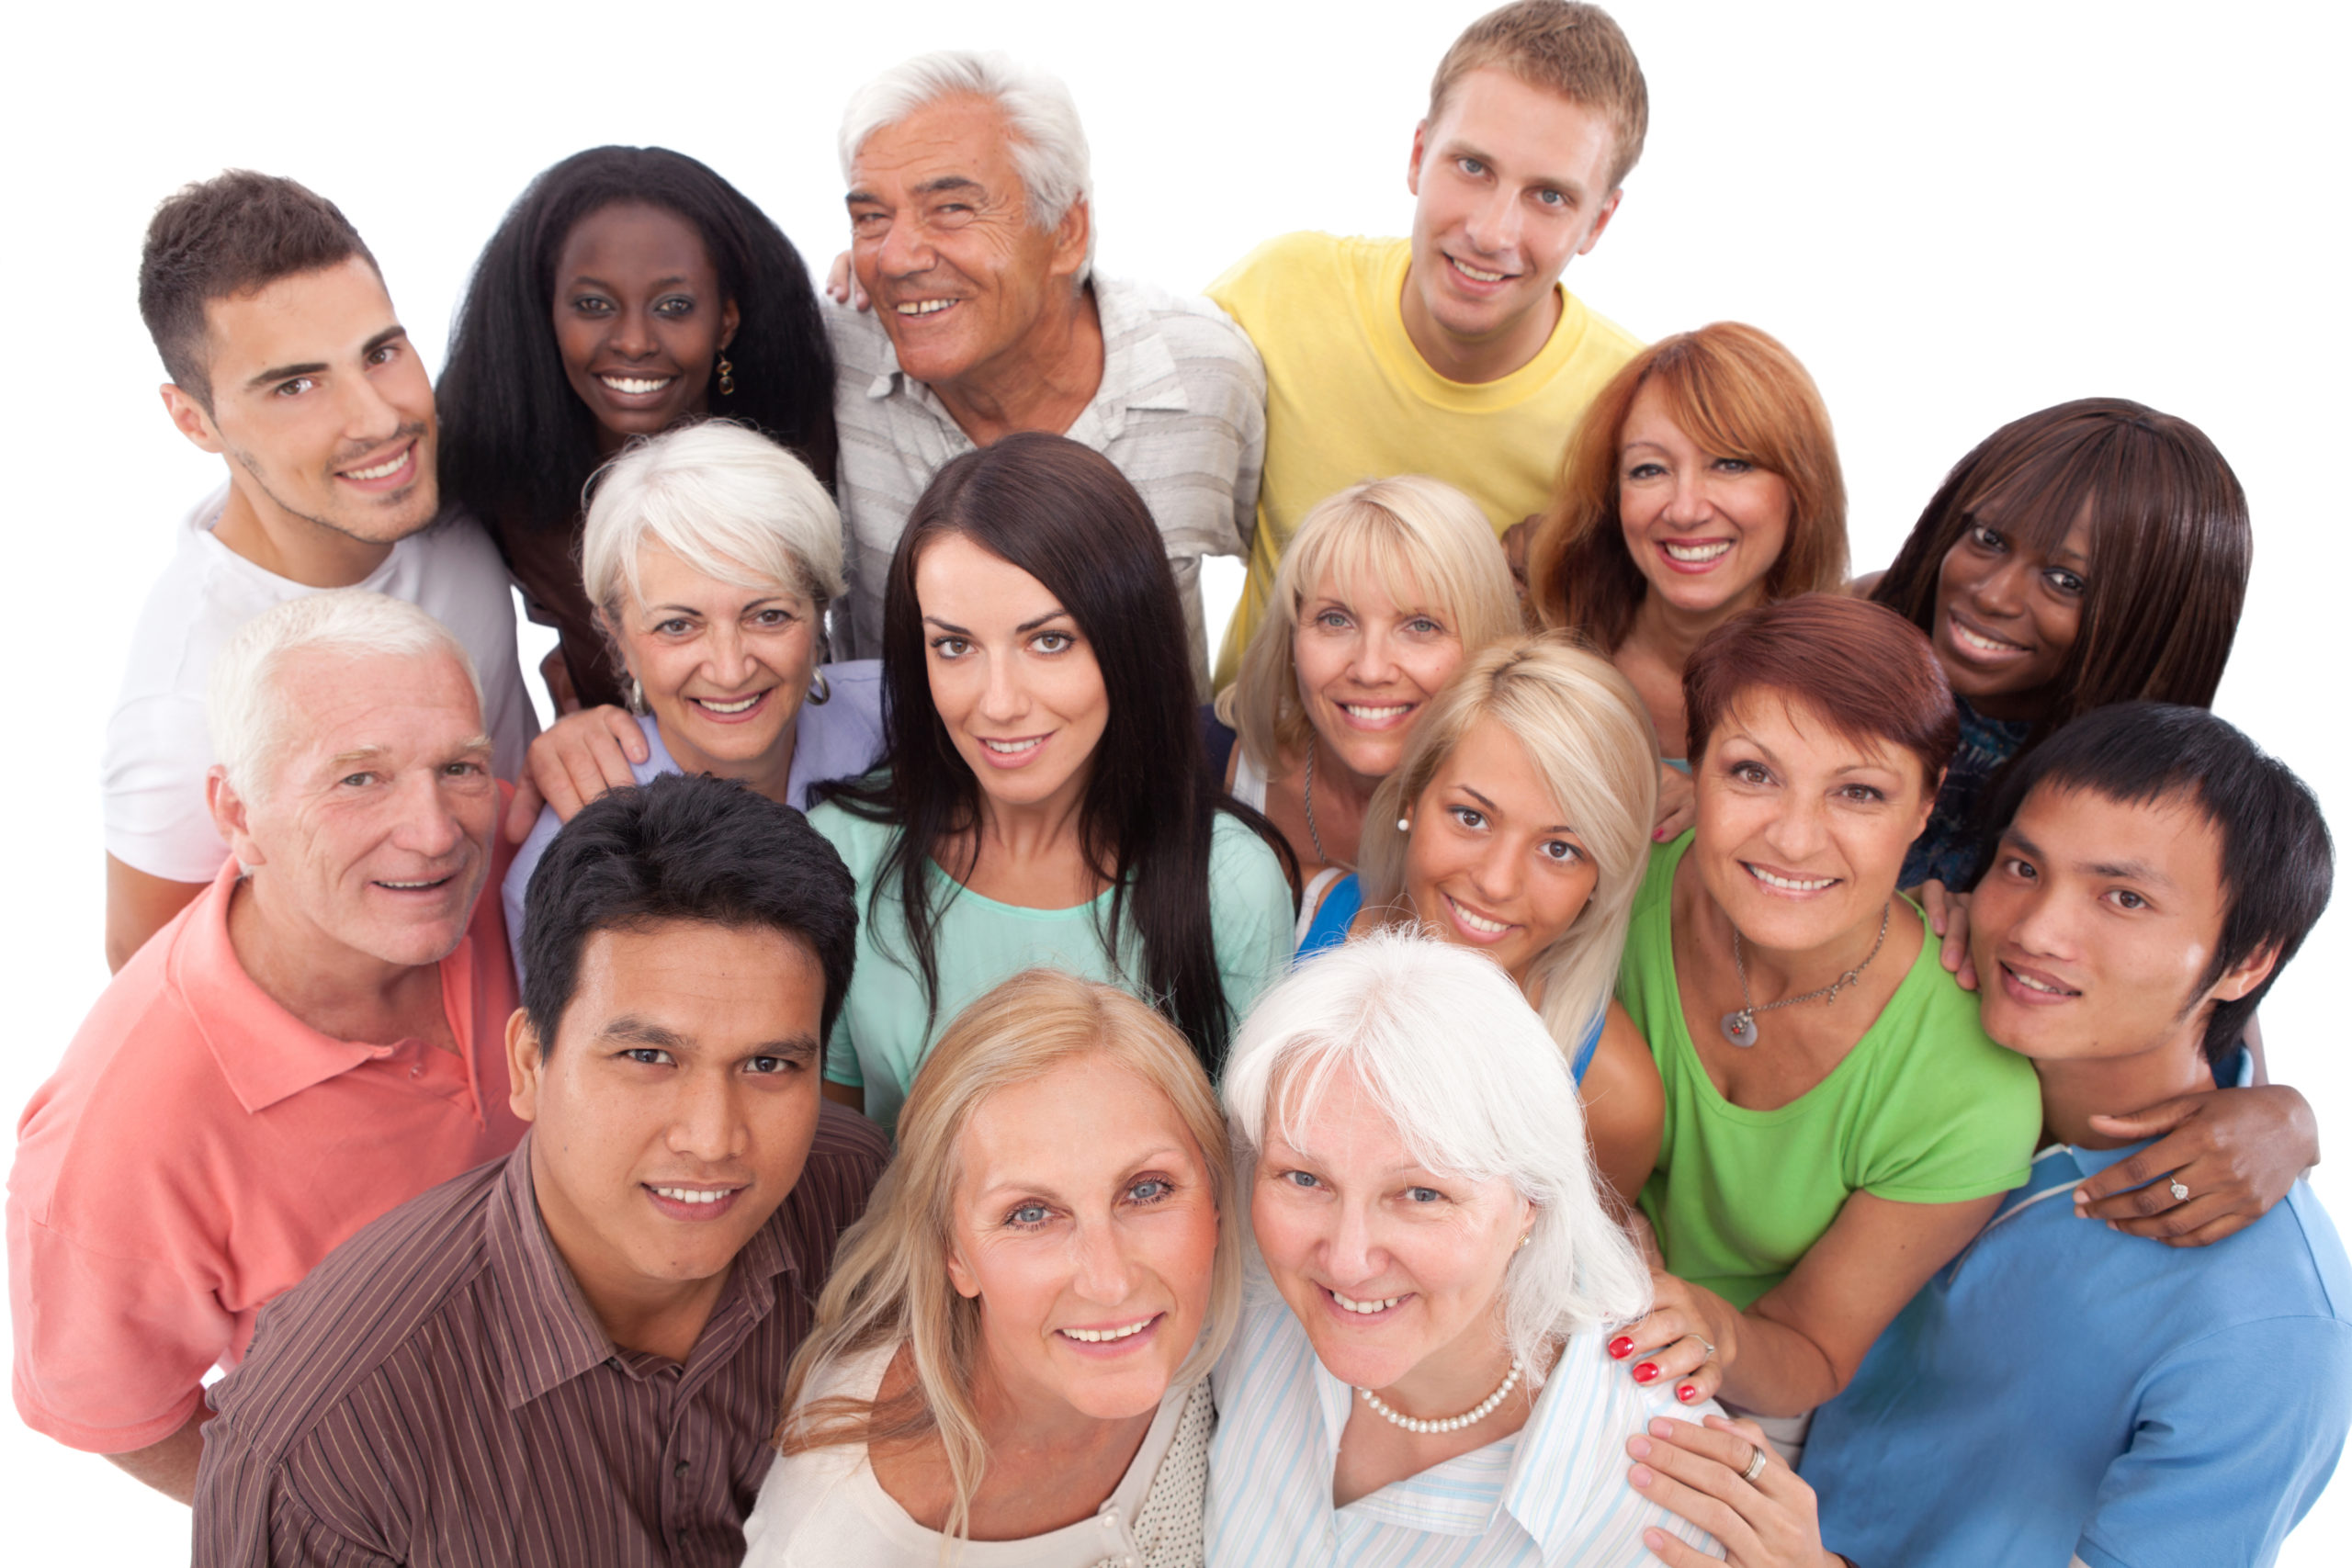 "Large group of people of all ages standing together, hugging, smiling and looking at camera.See more ISOLATED mages with these MODELS. Click on image below for lightbox."